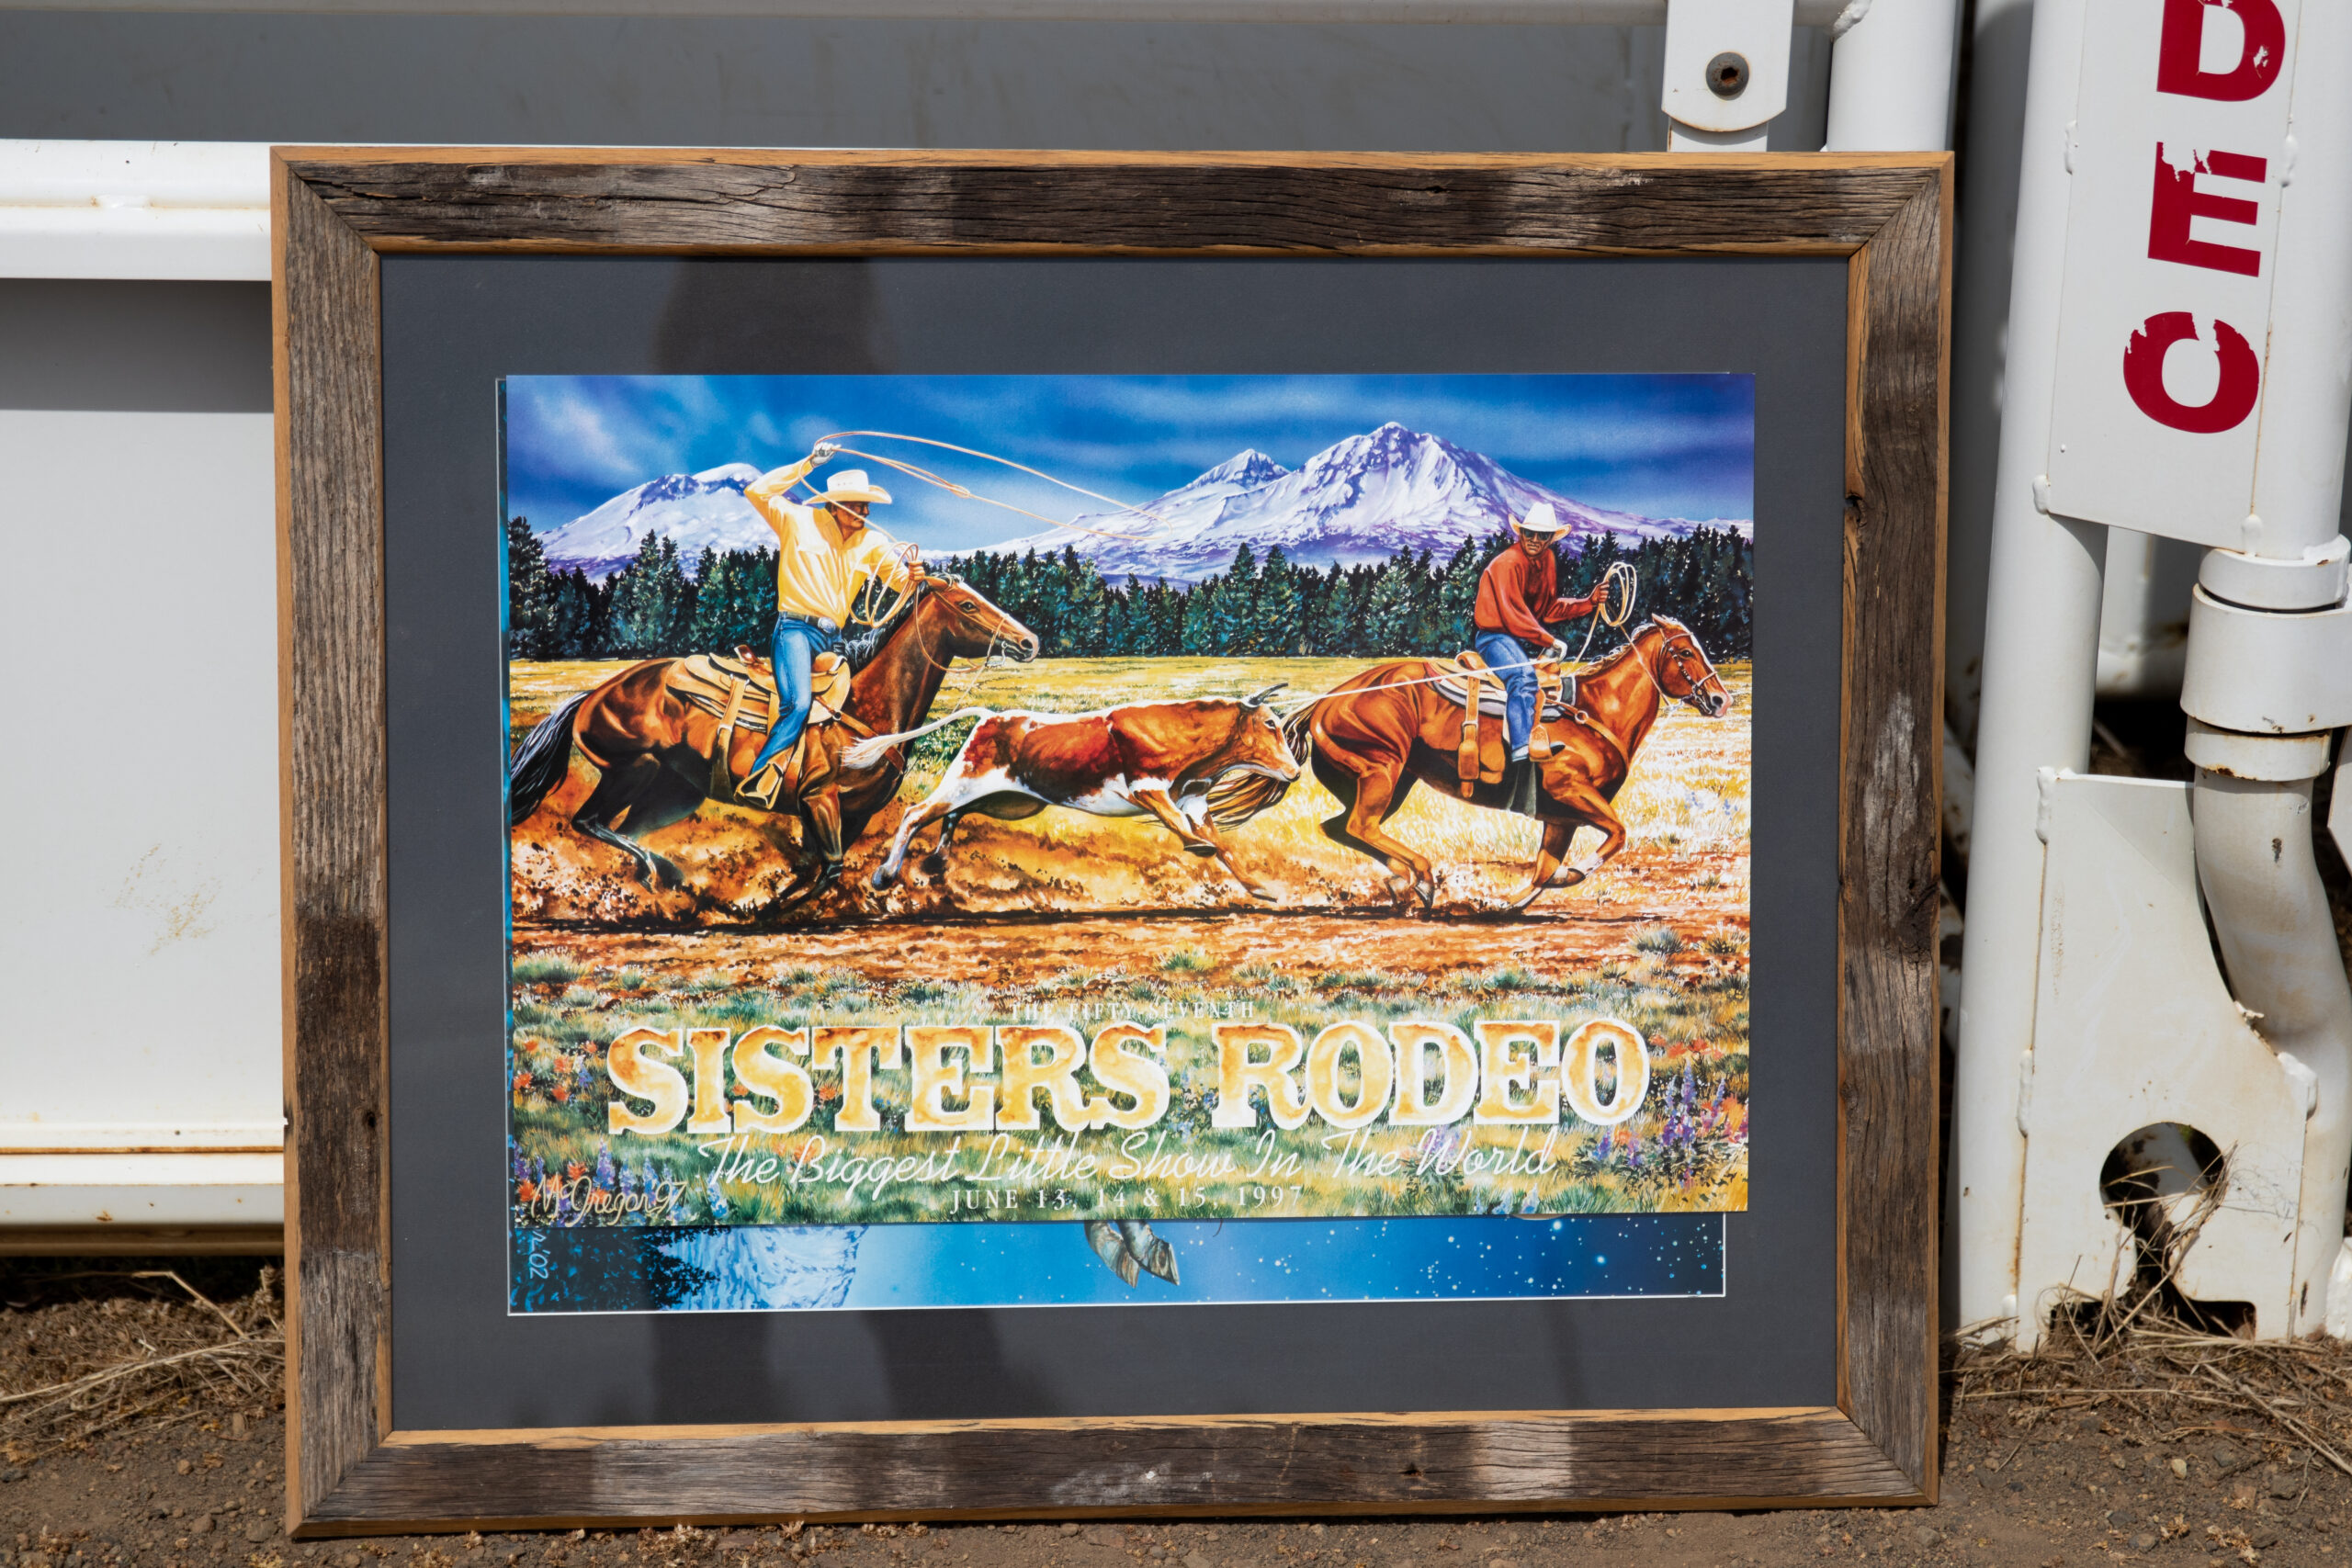 Rodeo 1997 - Sisters Rodeo Poster Sisters